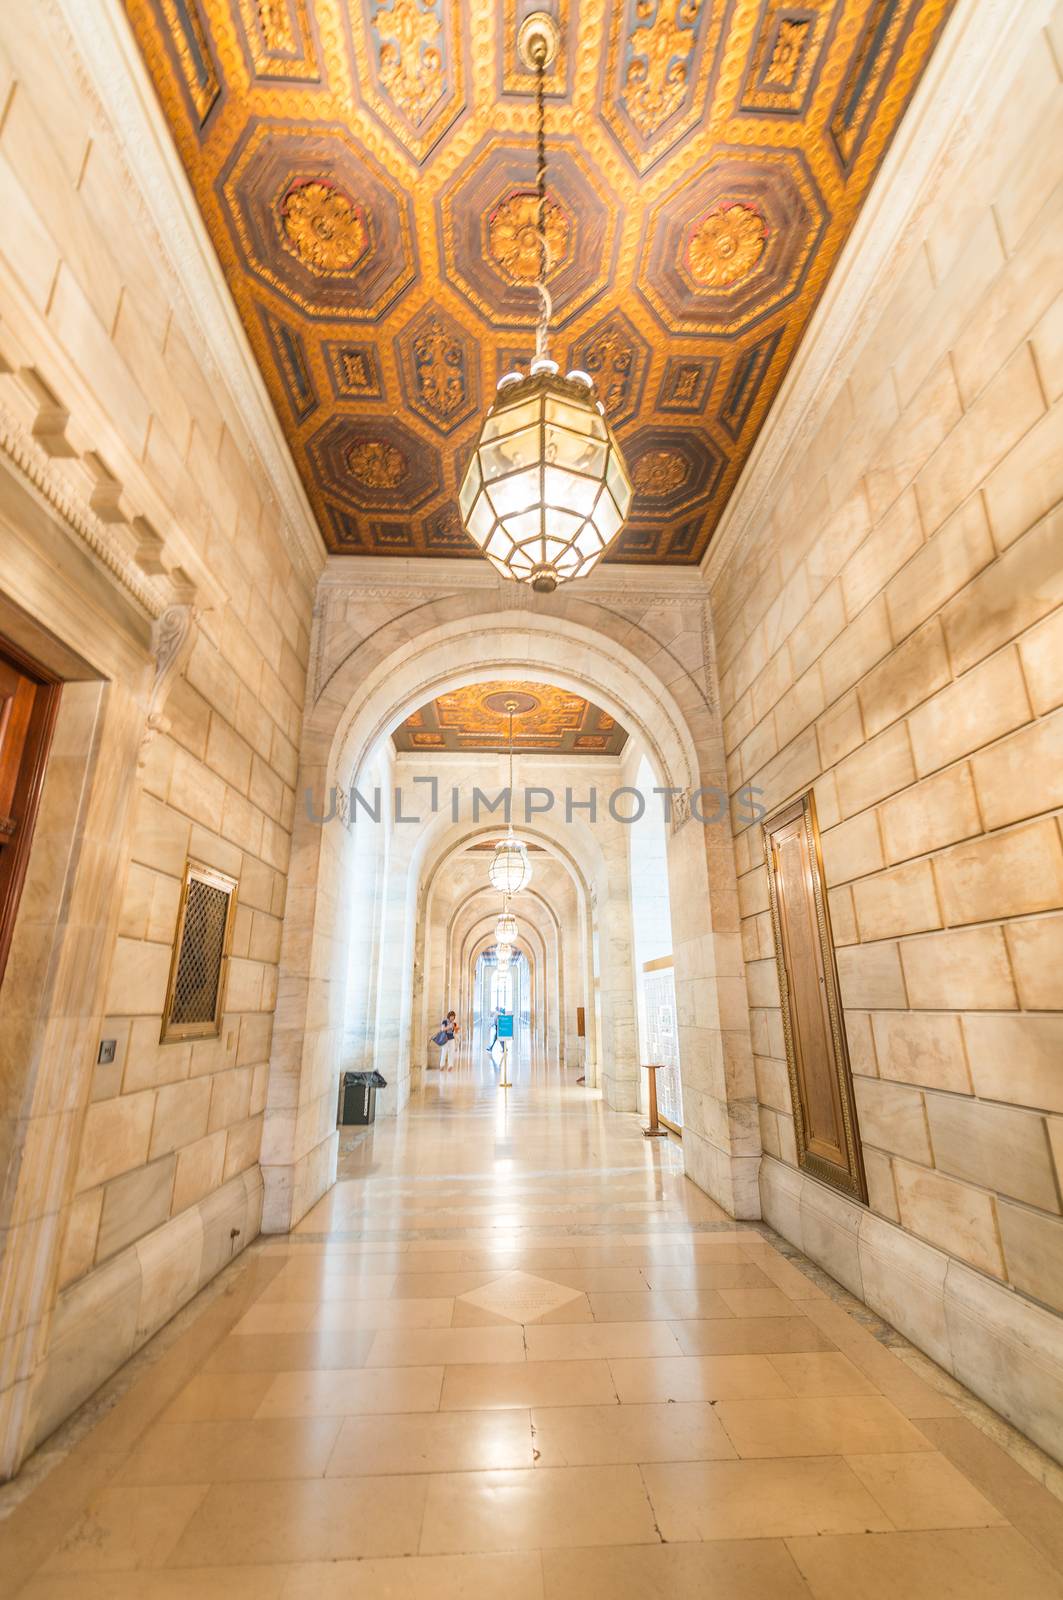 NEW YORK CITY - MAY 20, 2013: Interior of Grand Central Terminal by jovannig